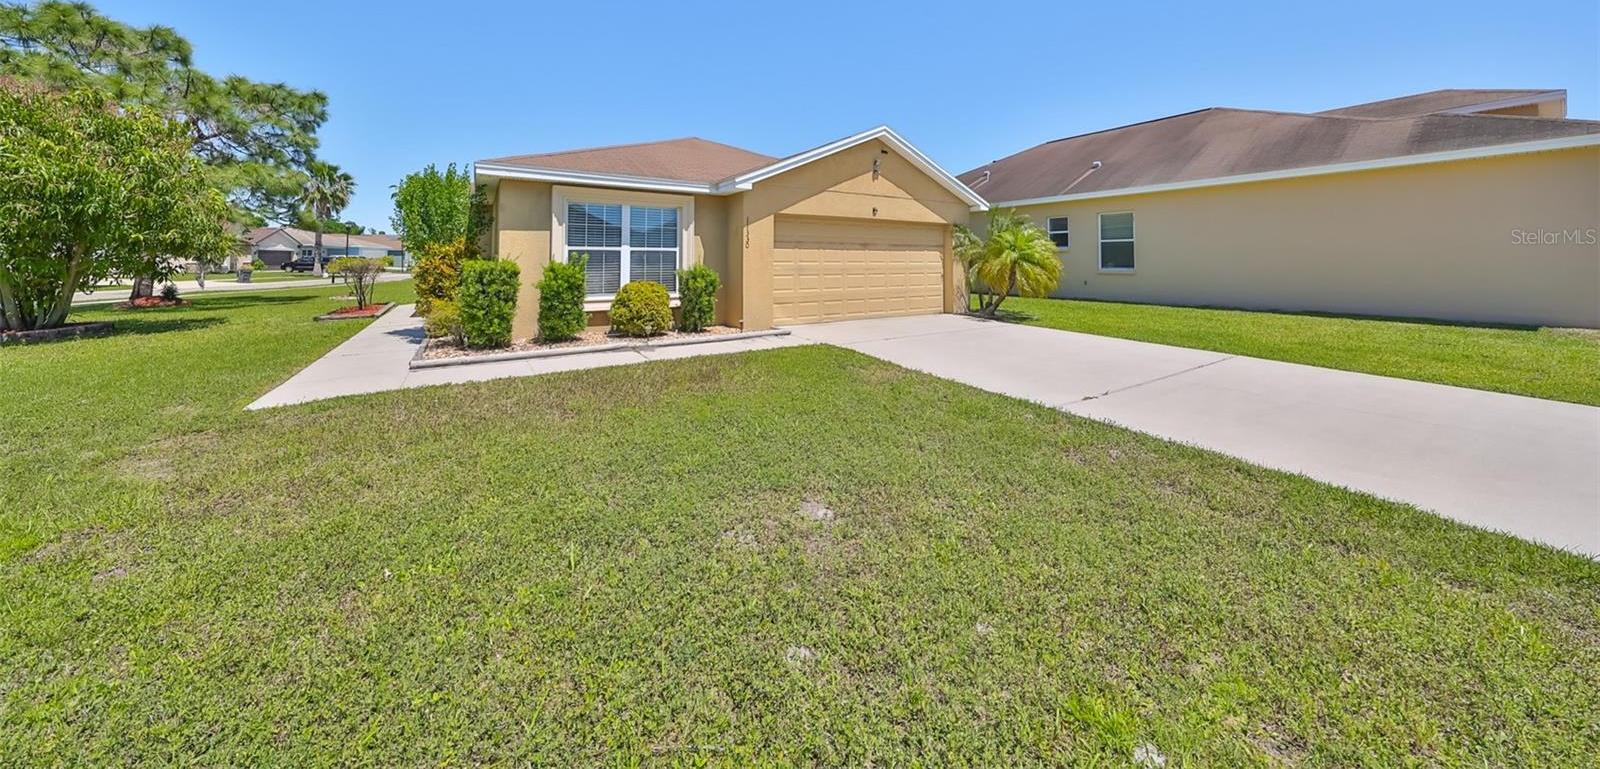 Photo one of 11330 Southwind Lake Dr Gibsonton FL 33534 | MLS T3495182